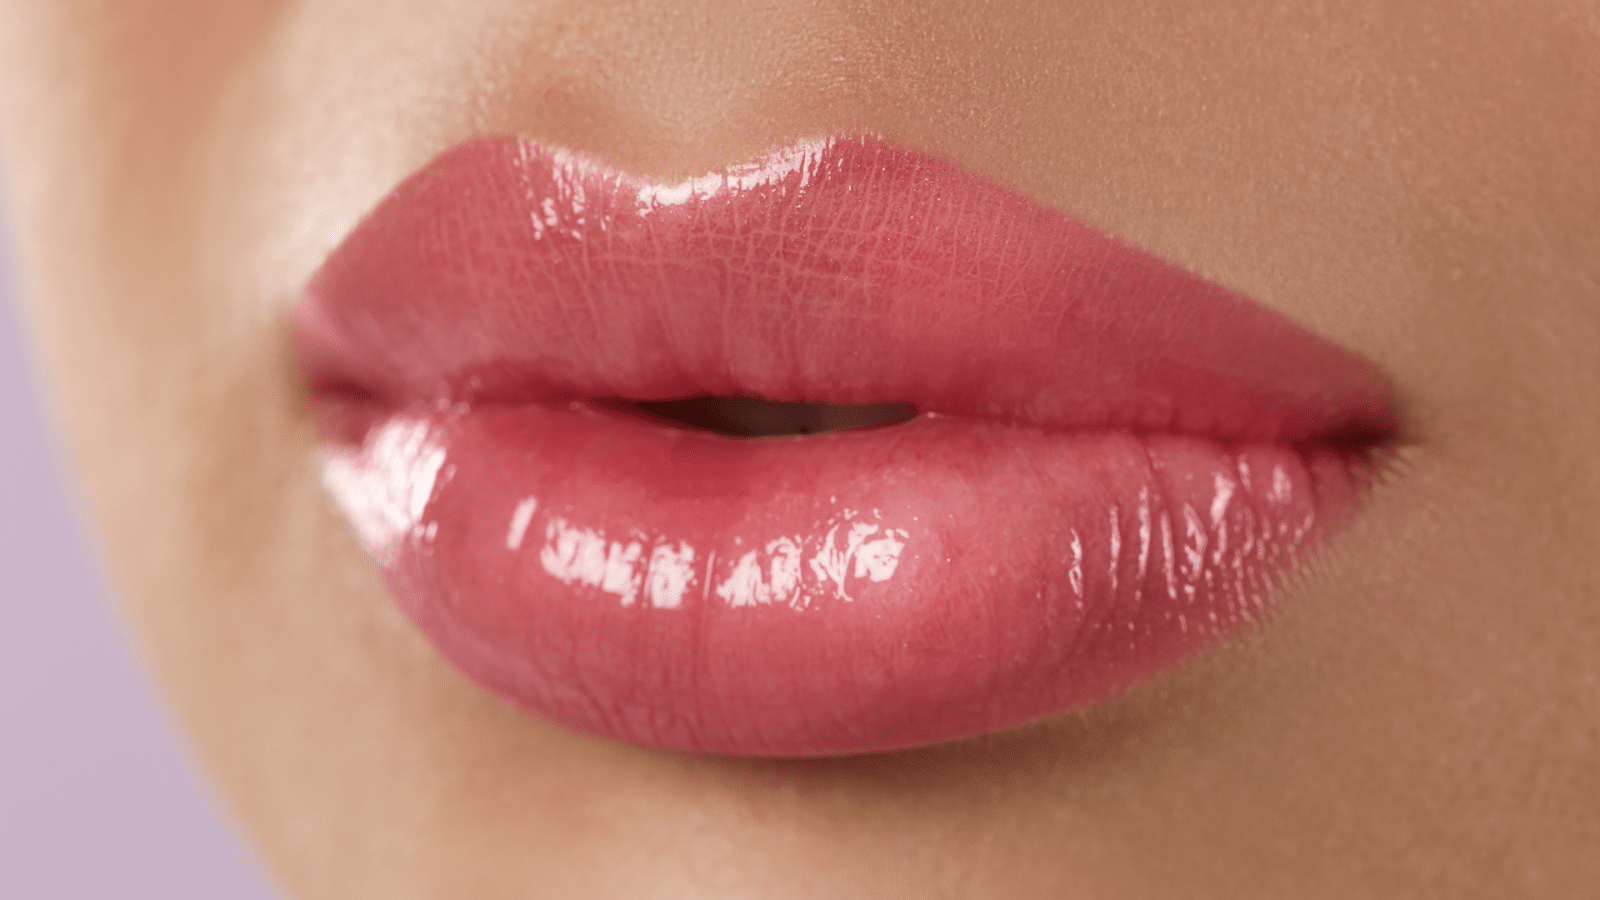 An image of plump and defined lips.